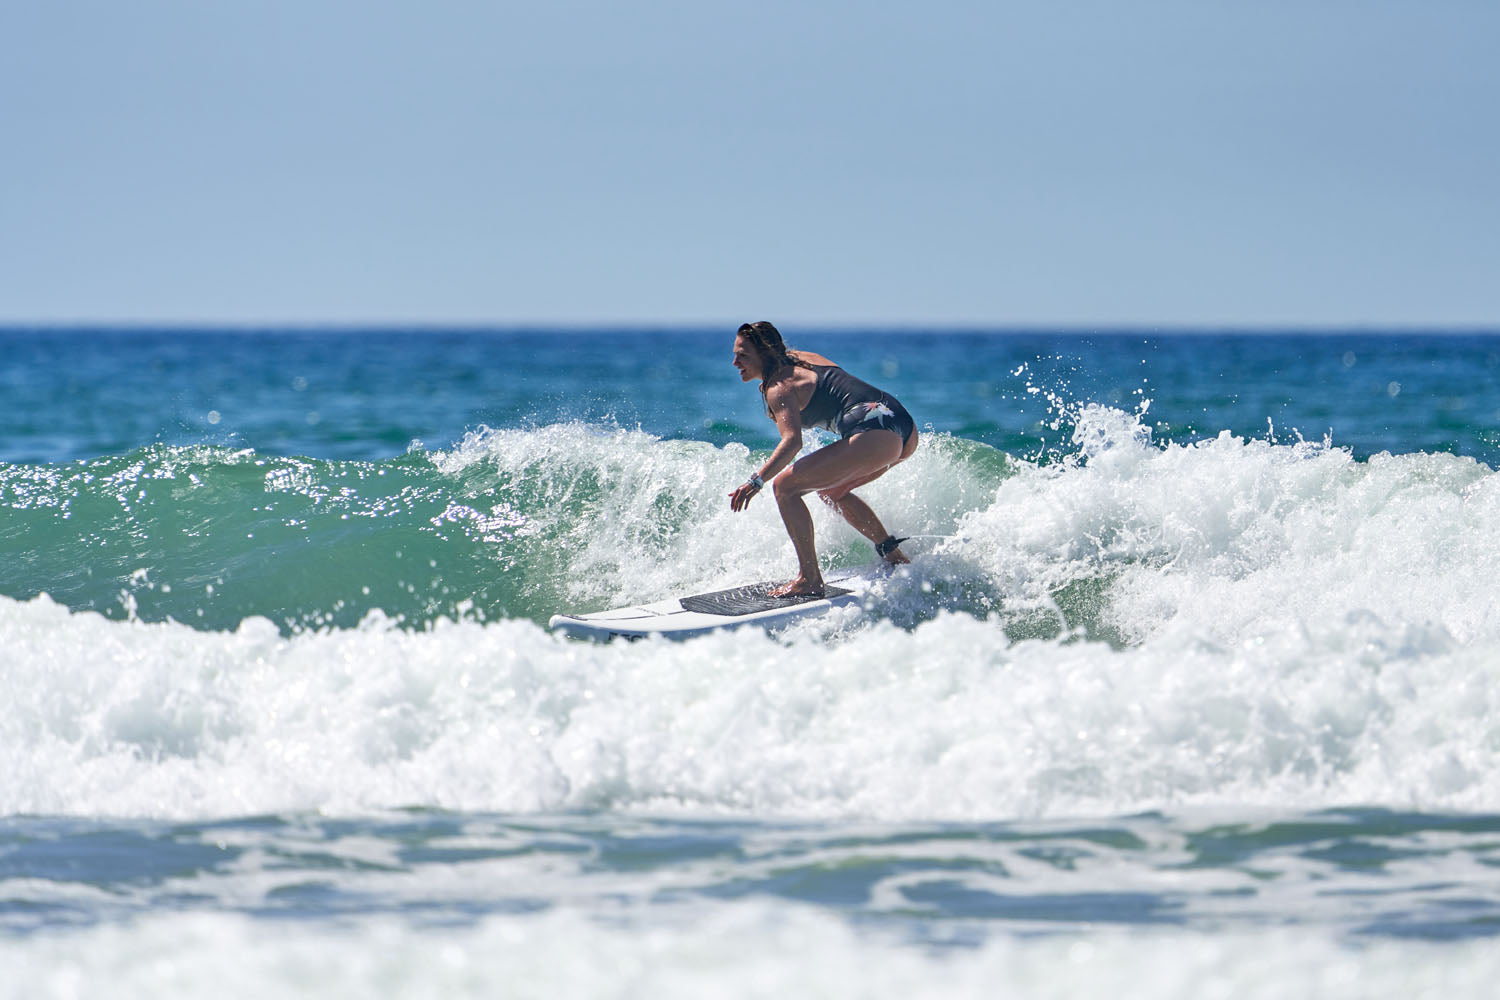 GONG | Surf Inflatable Shortboard